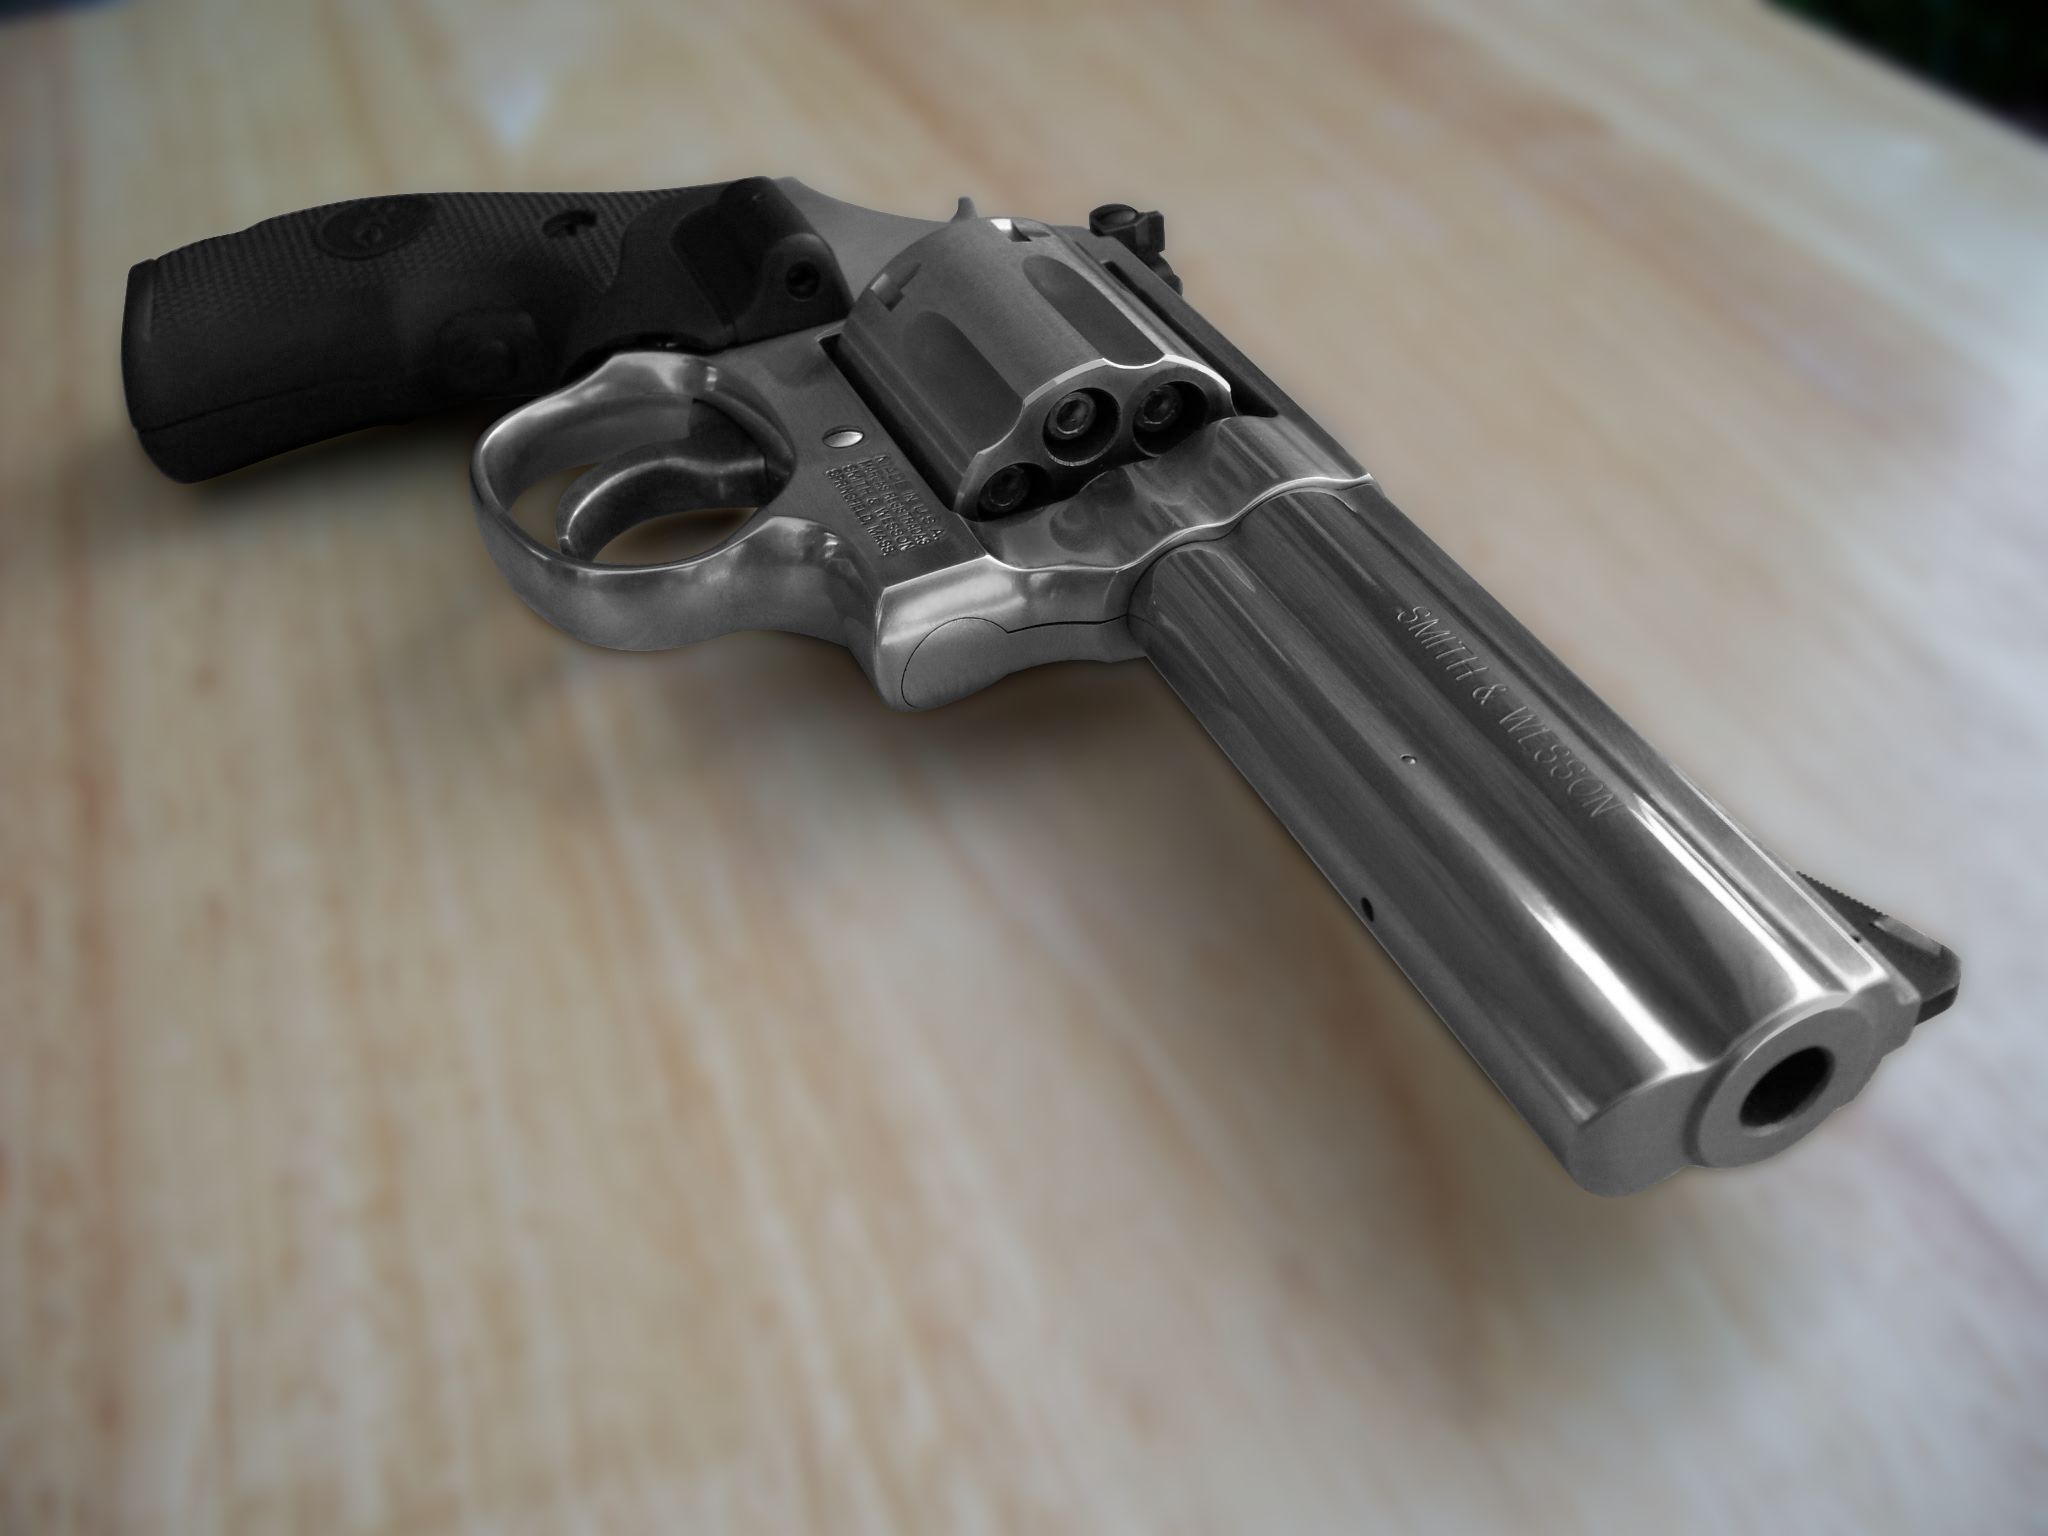 Smith & Wesson model 686